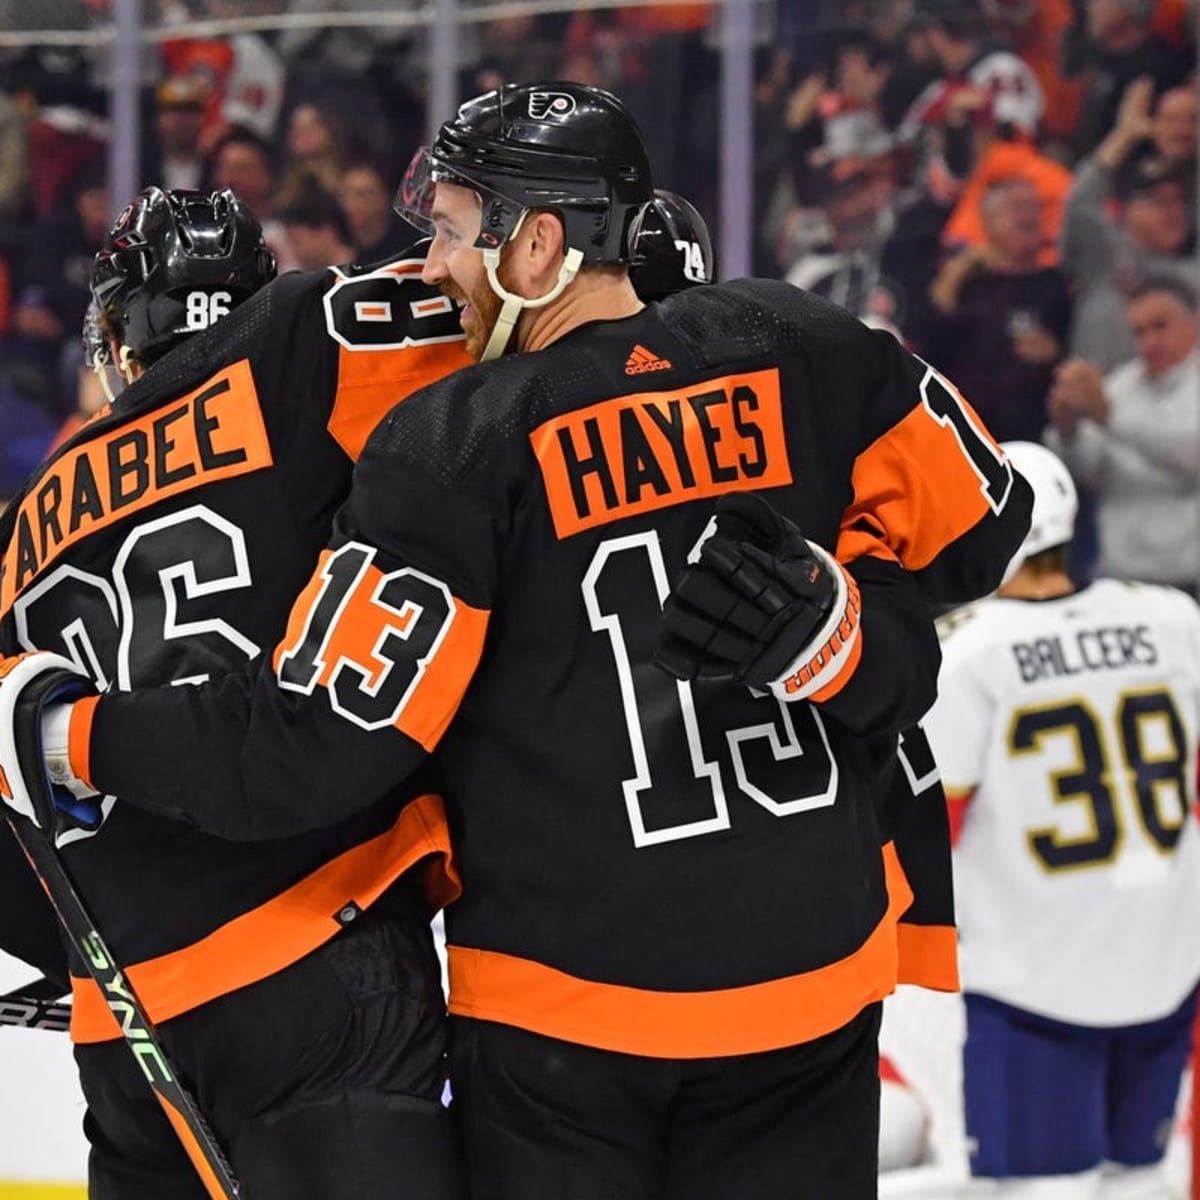 Devils at Flyers Free Live Stream NHL Online, Channel, Time - How to Watch and Stream Major League and College Sports